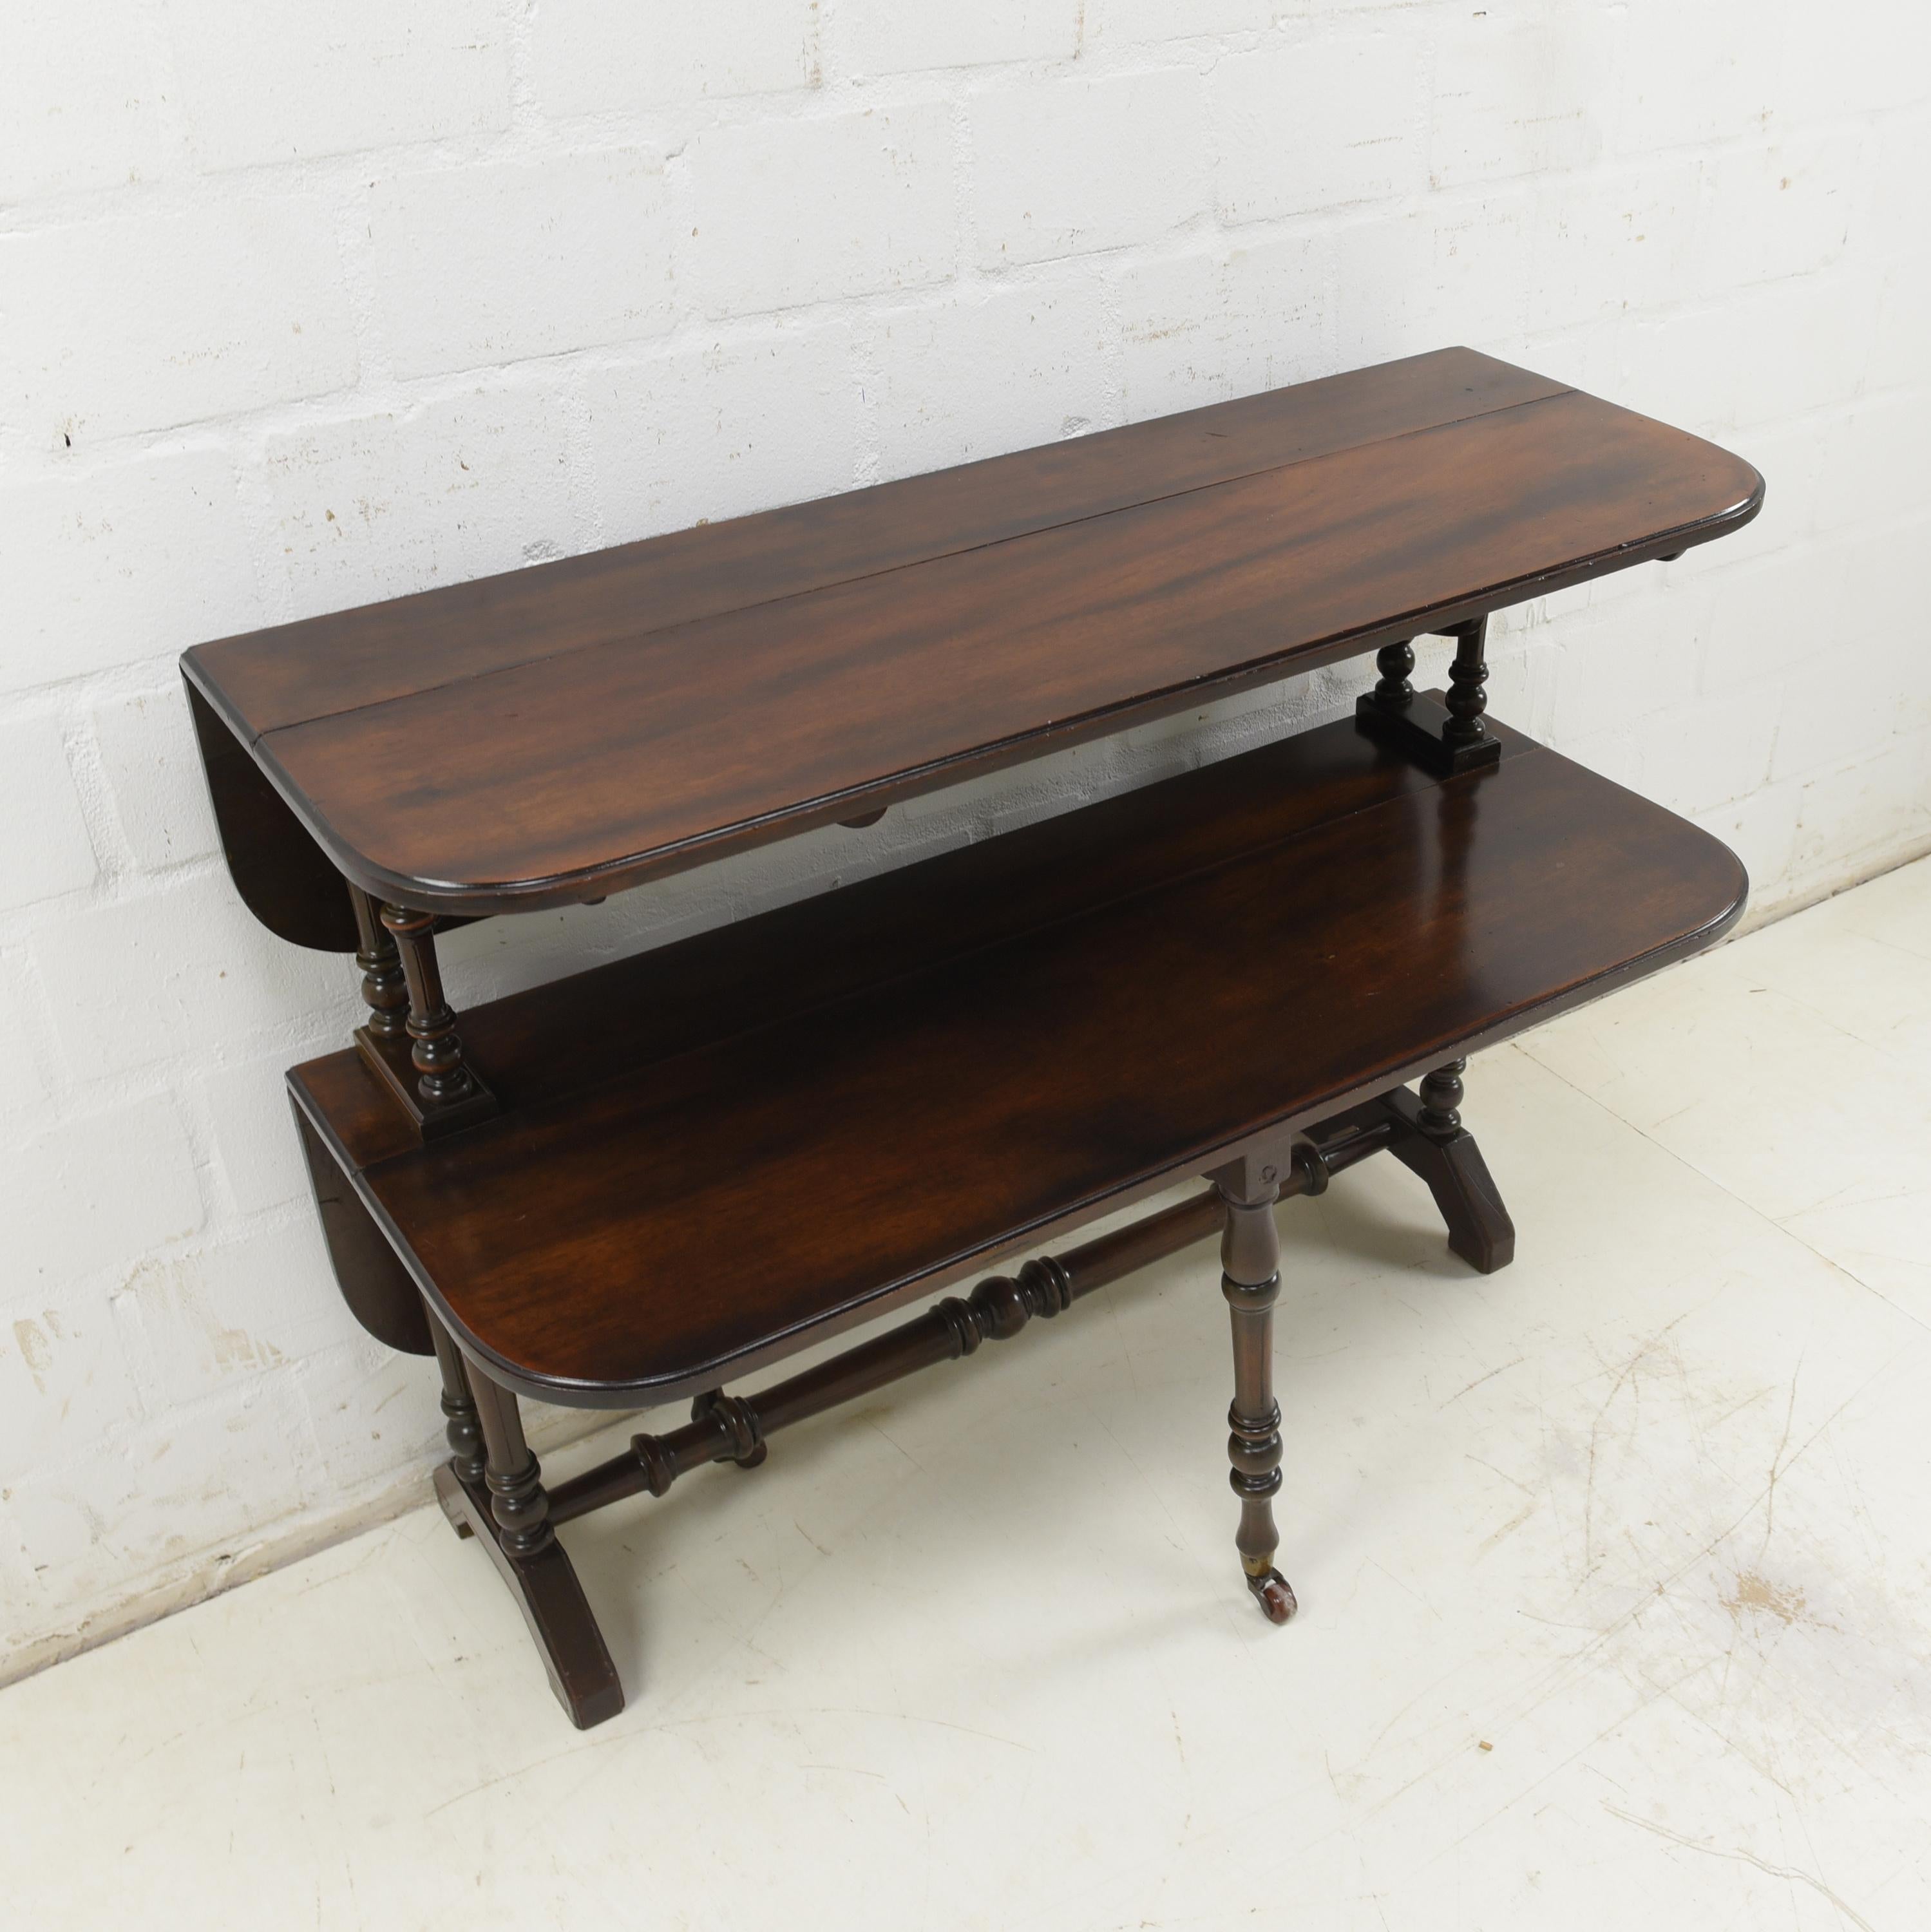 Two Tier Gateleg Folding Table / Shelving Table in Mahogany England, 1880 For Sale 3